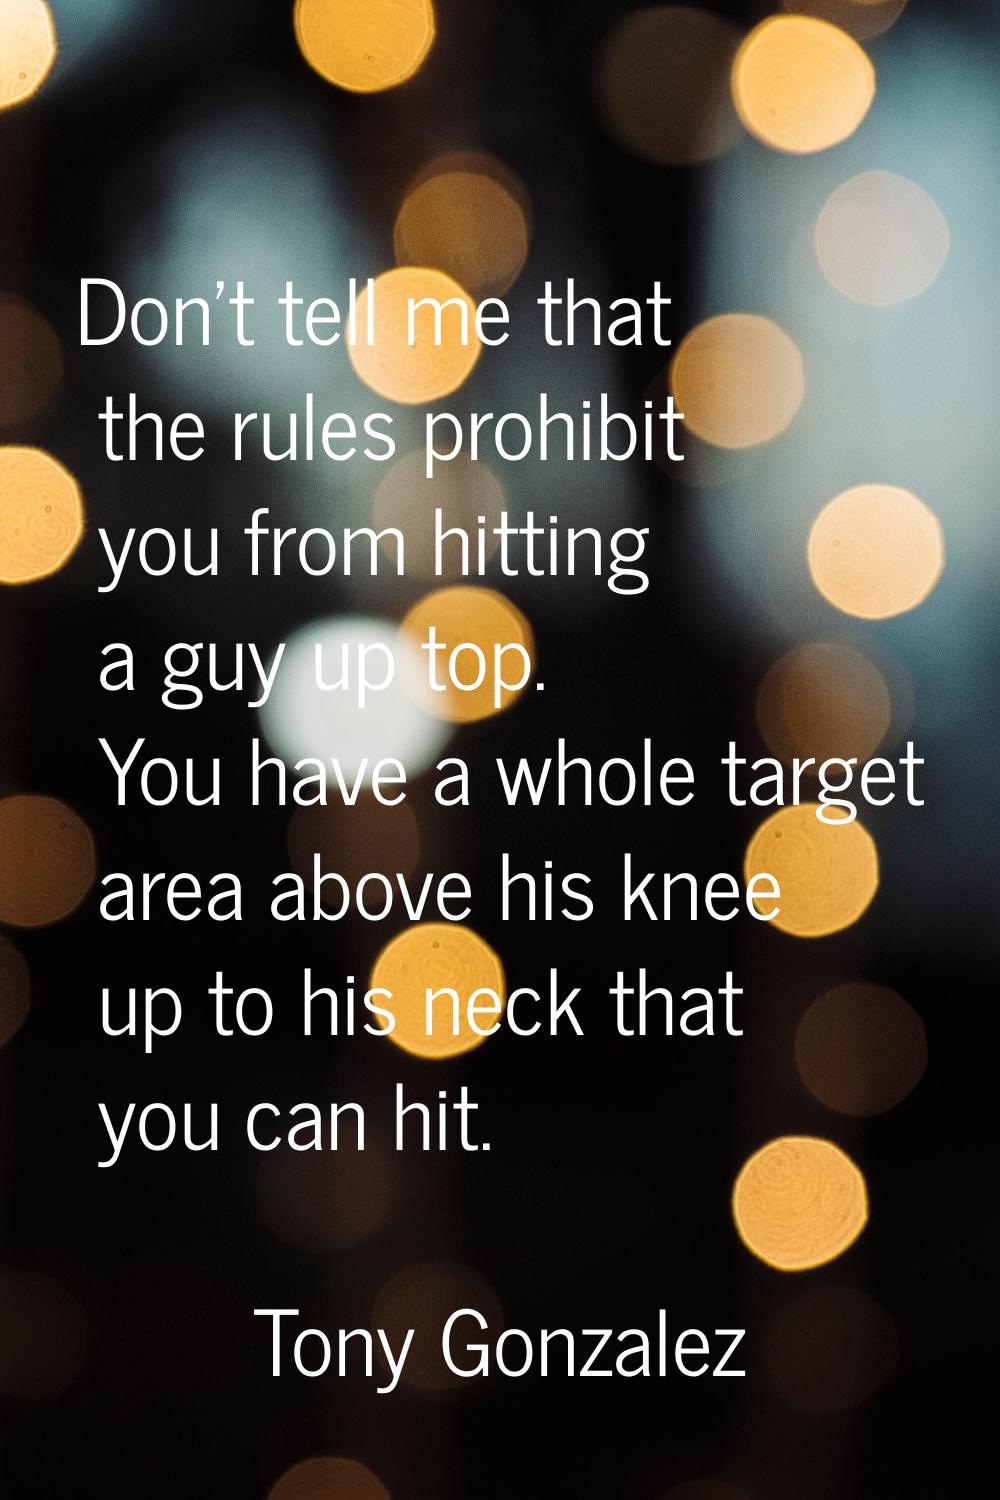 Don't tell me that the rules prohibit you from hitting a guy up top. You have a whole target area a